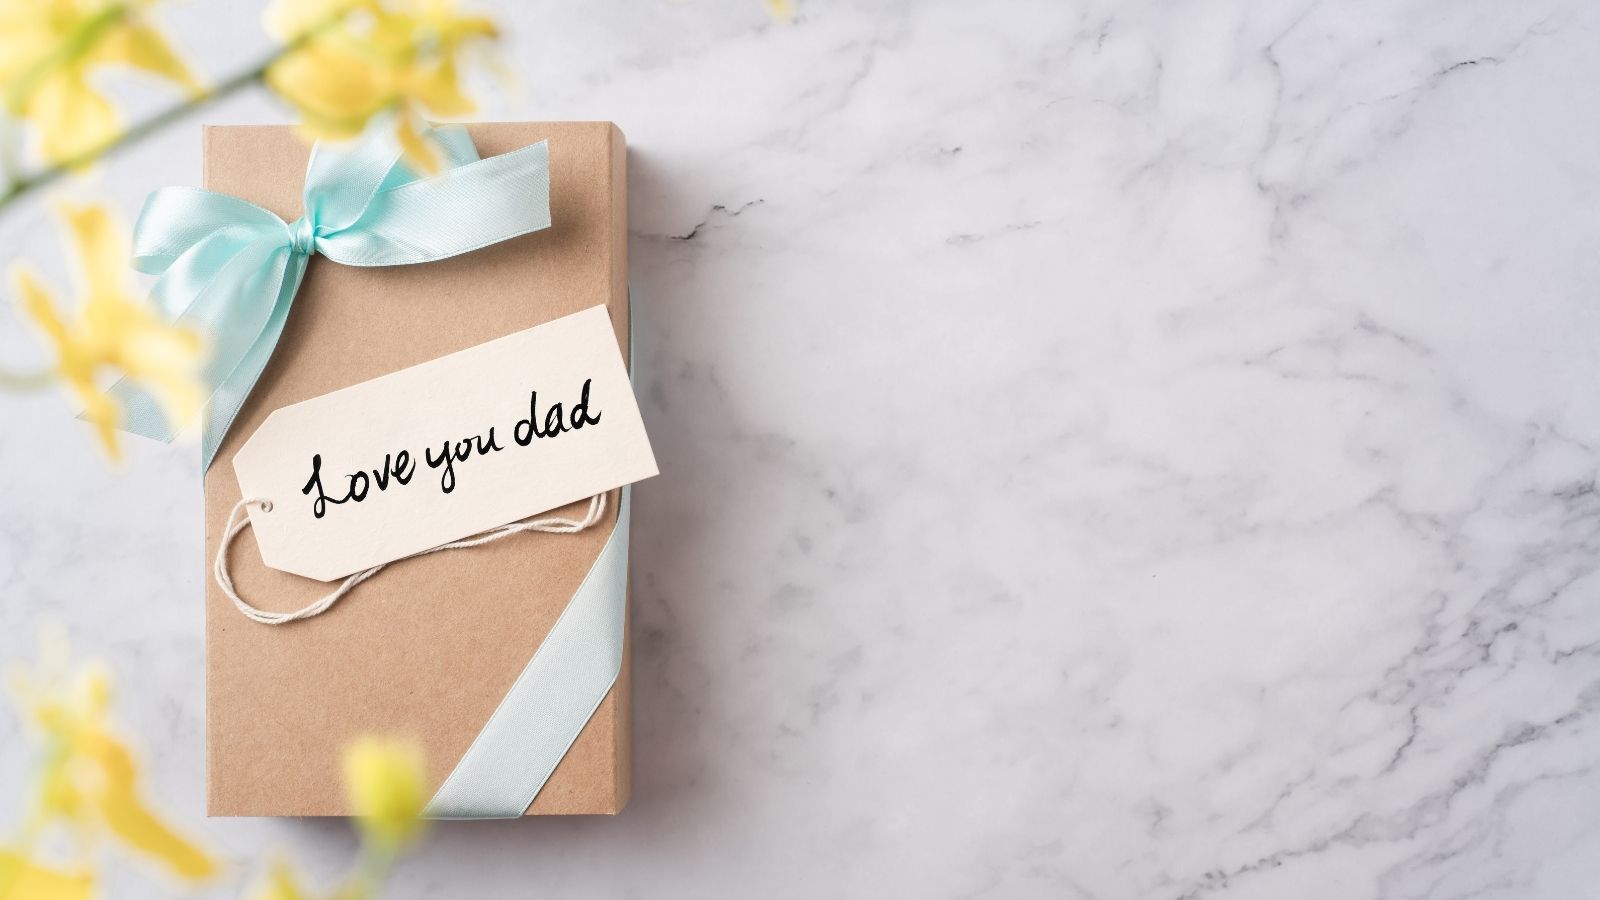 Best Gifts for Dad in 2021